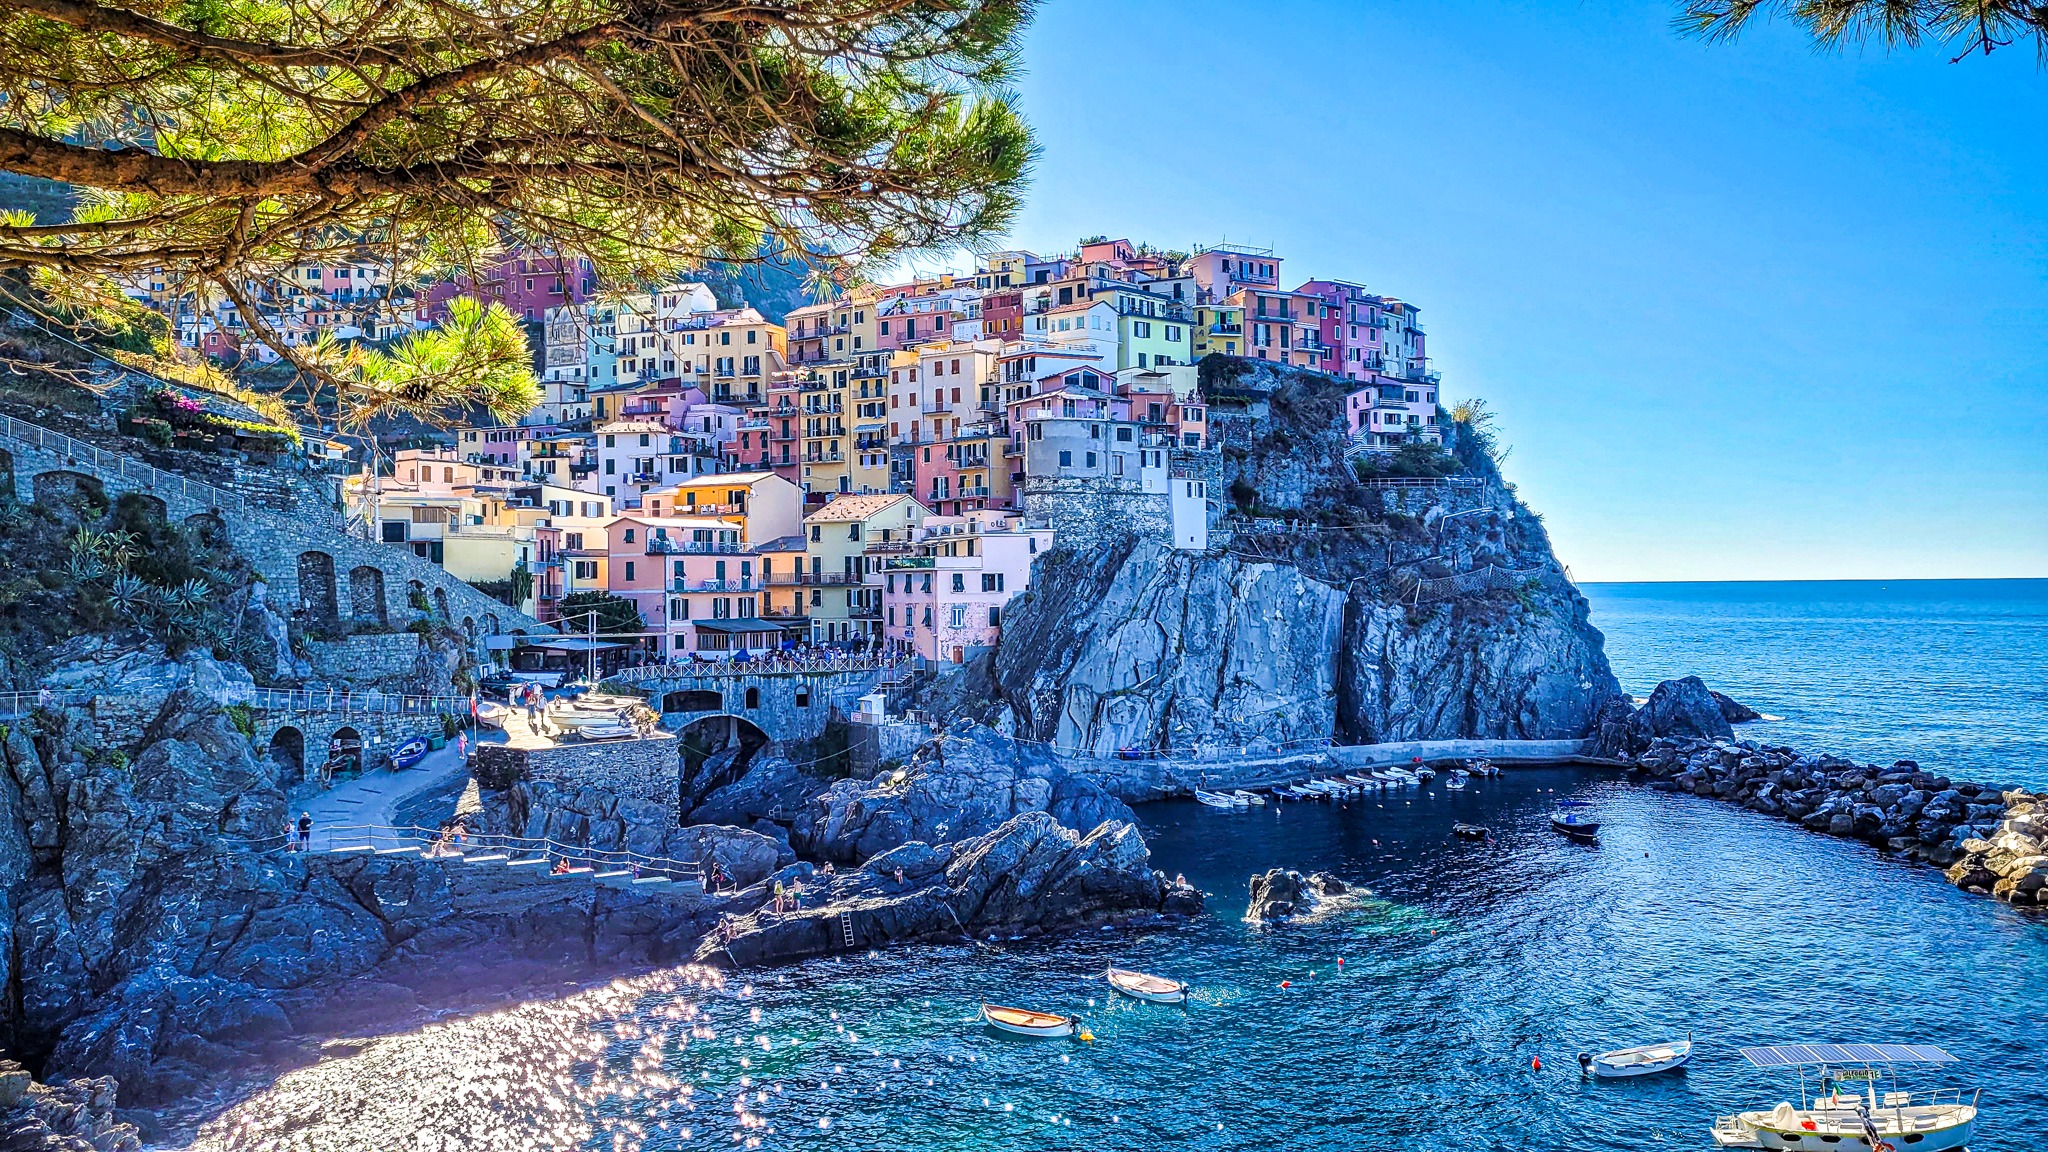 Read more about the article Discover the history and architecture of Cinque Terre in Italy.